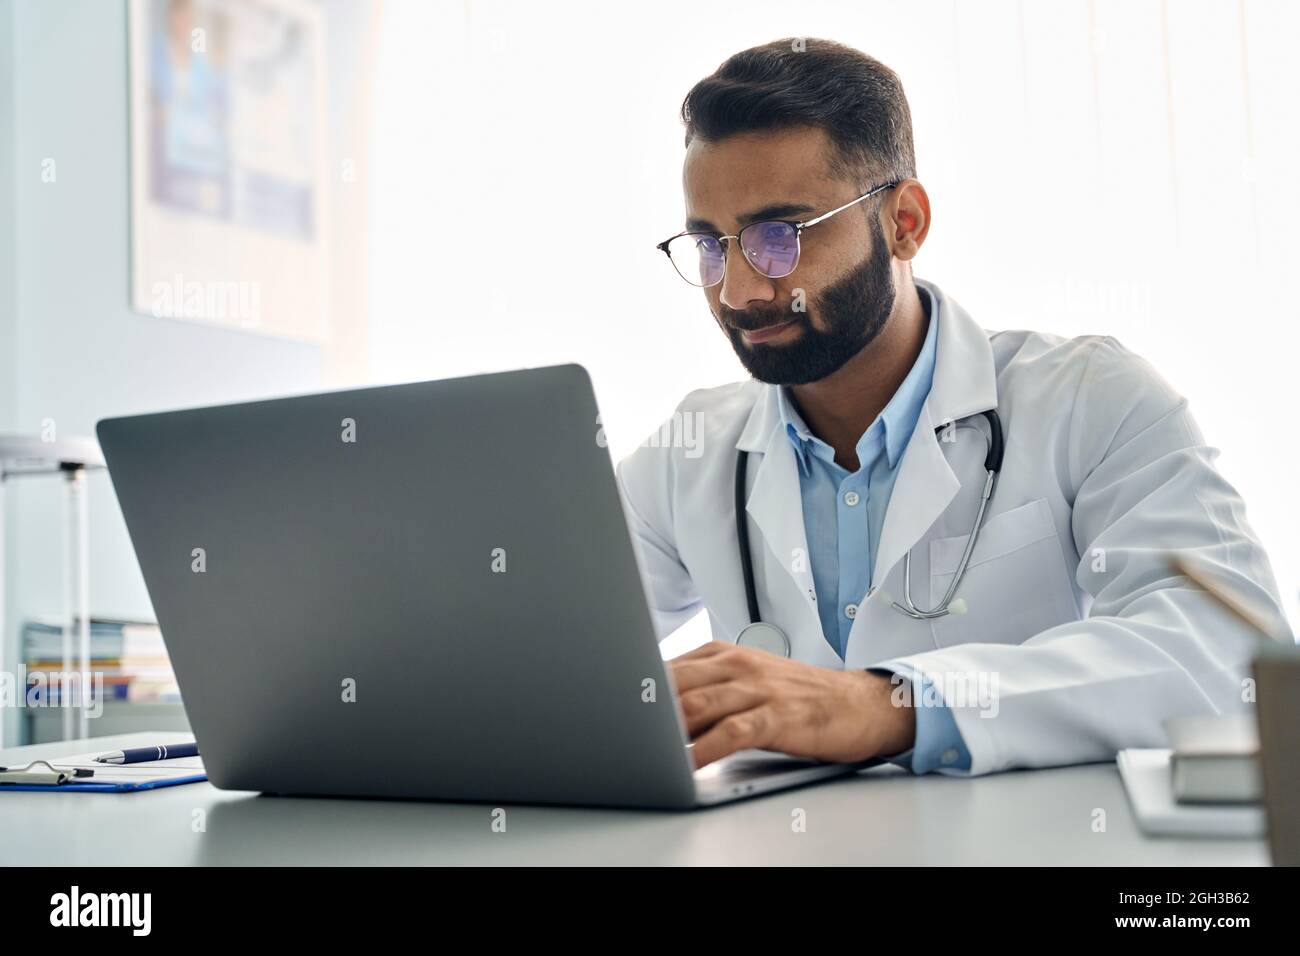 Indian male doctor using laptop computer at work in hospital. Stock Photo